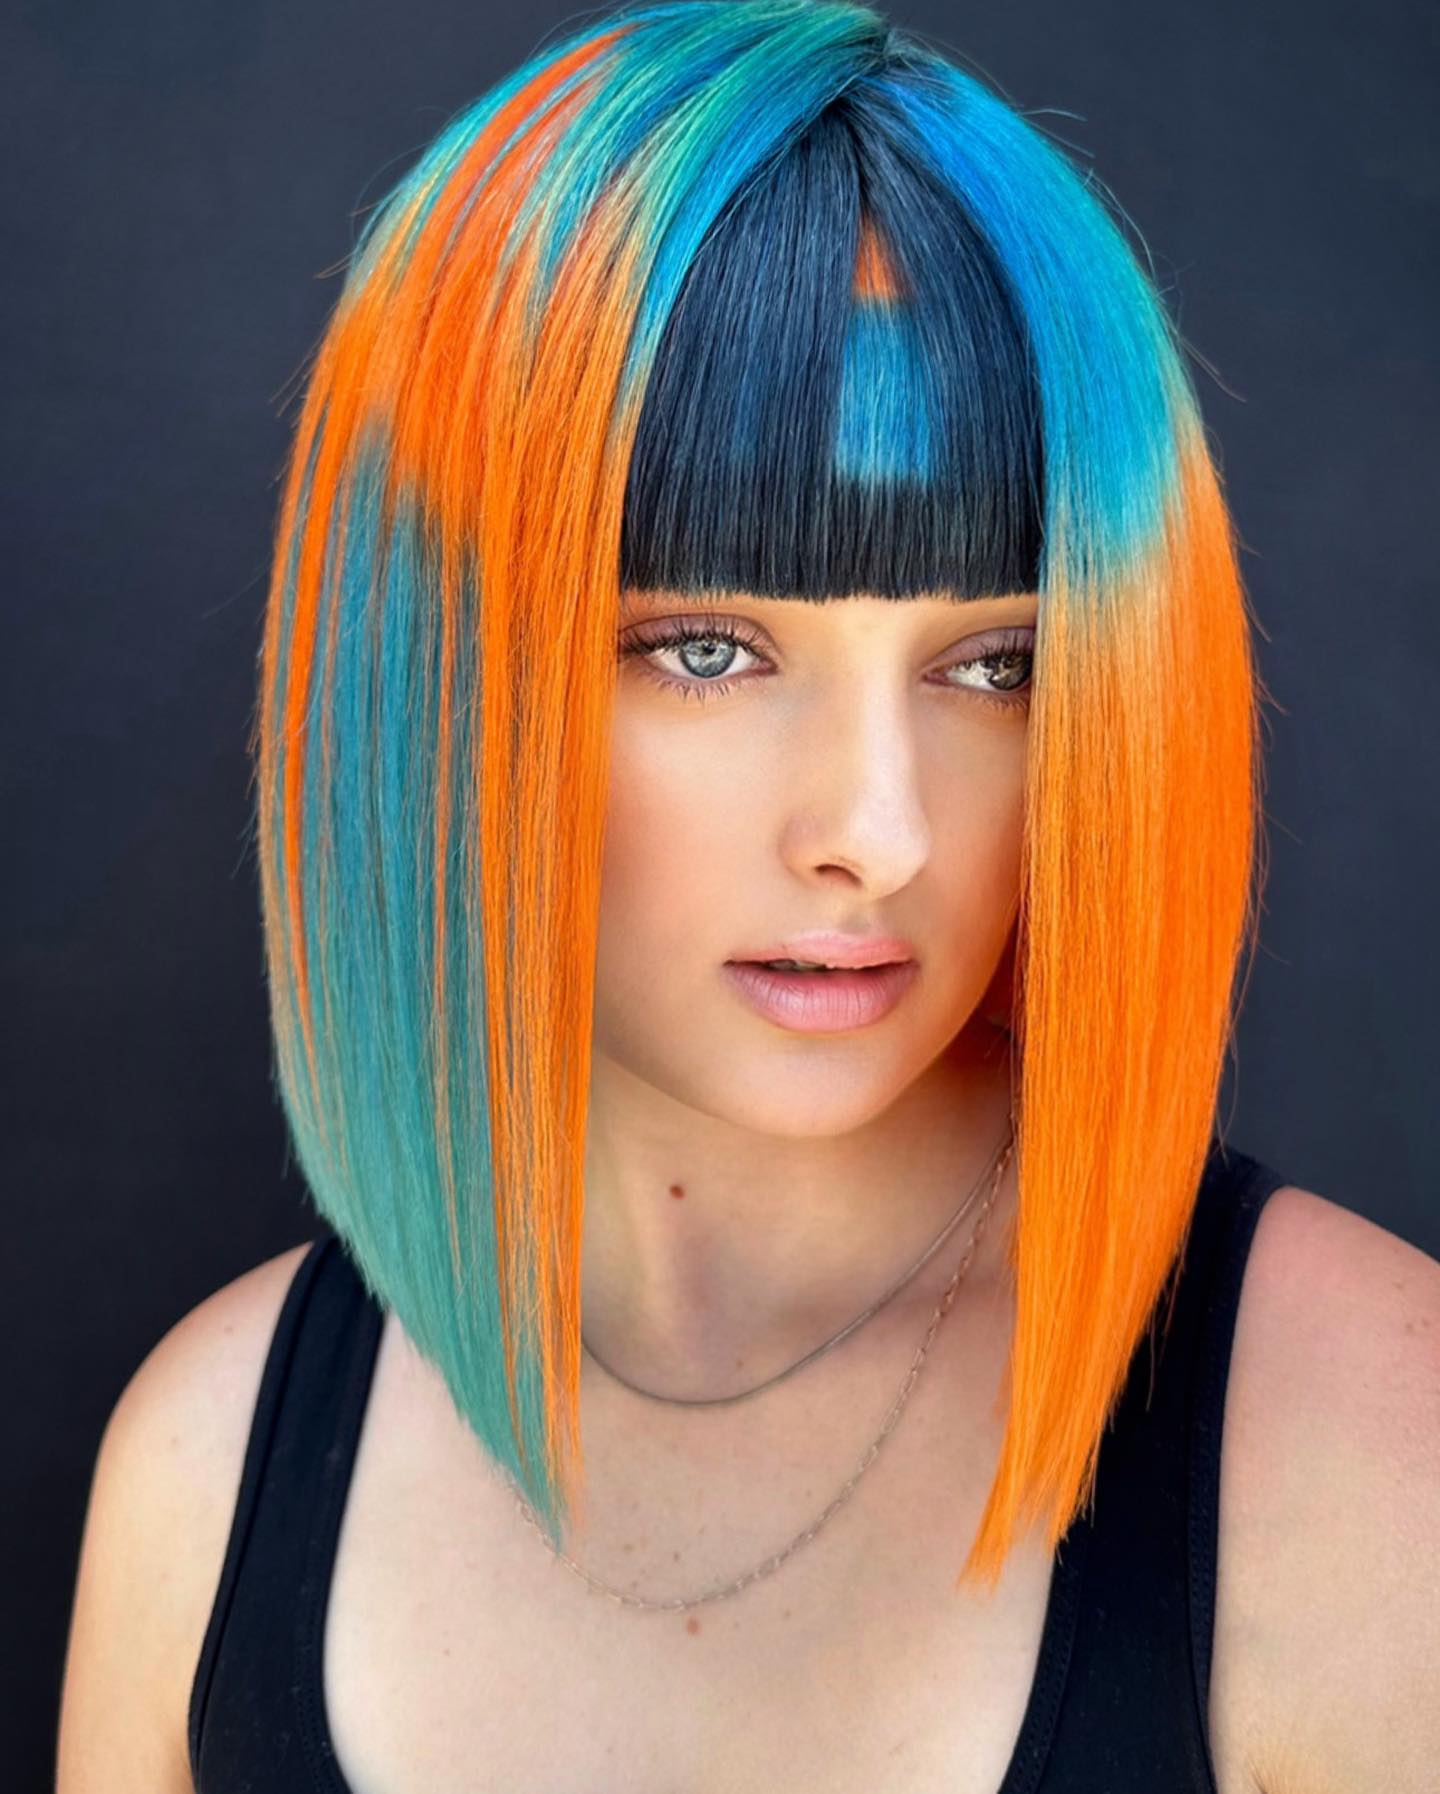 100+ Best Colorful Hair Ideas images 14